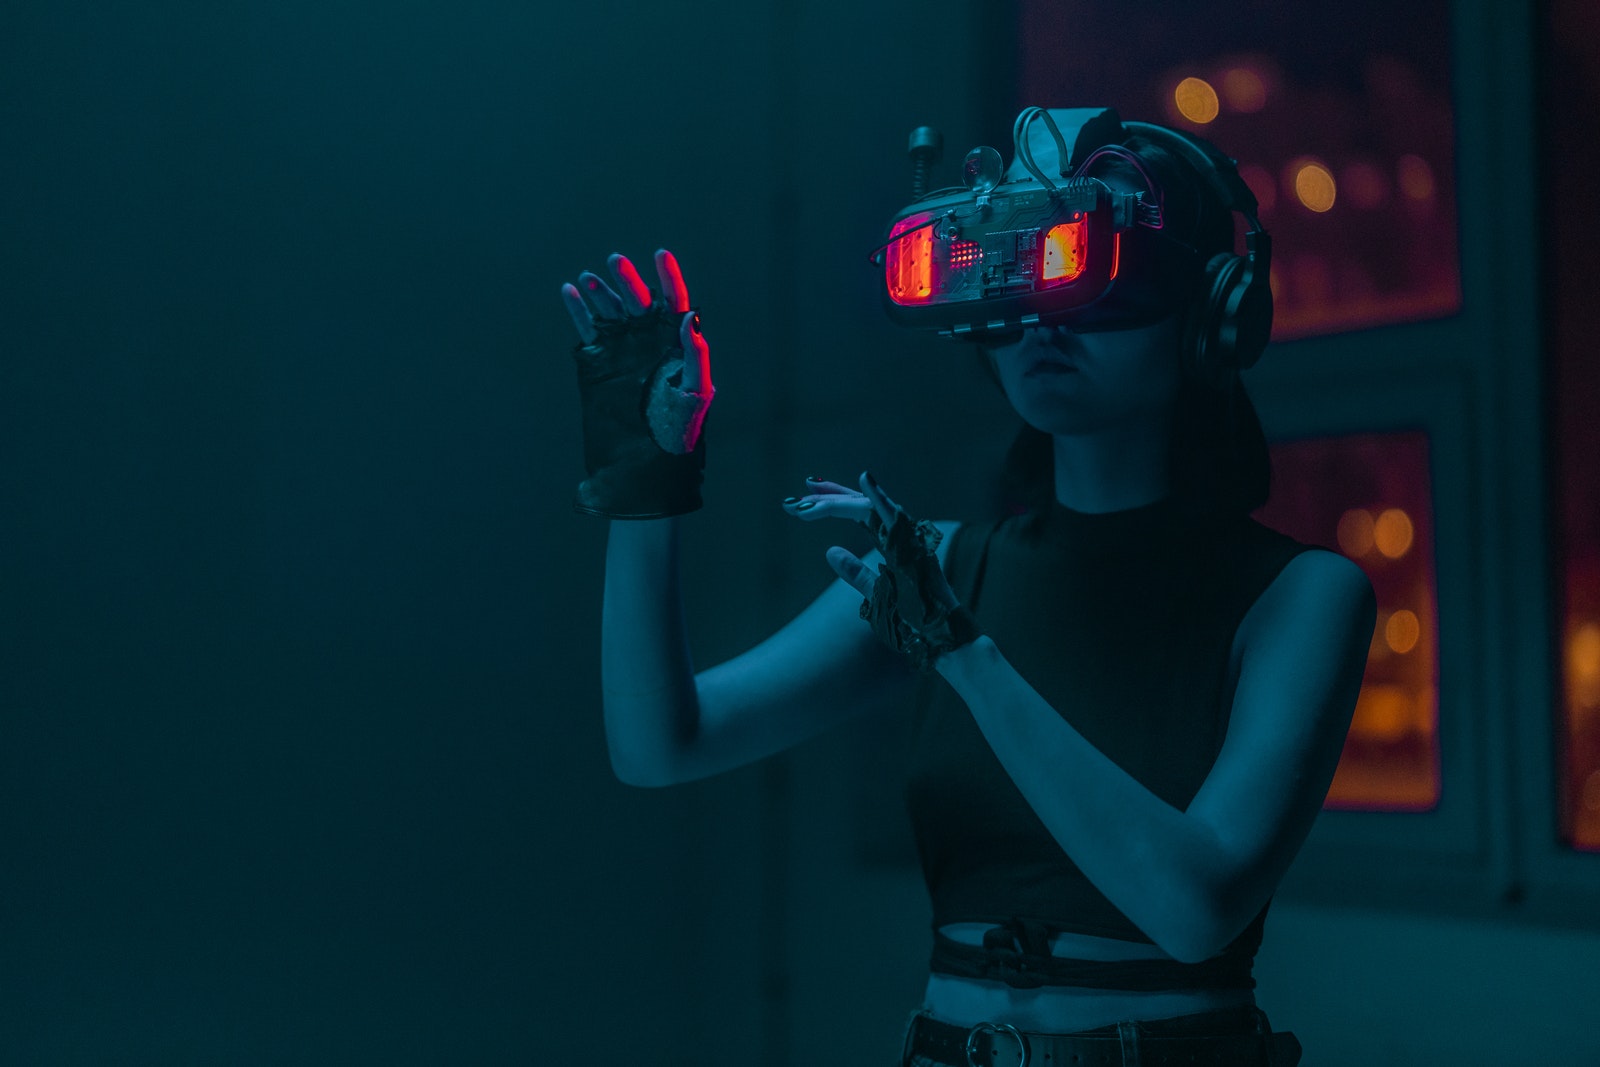 A Person Doing Hand Gestures While Wearing a Vr Goggles